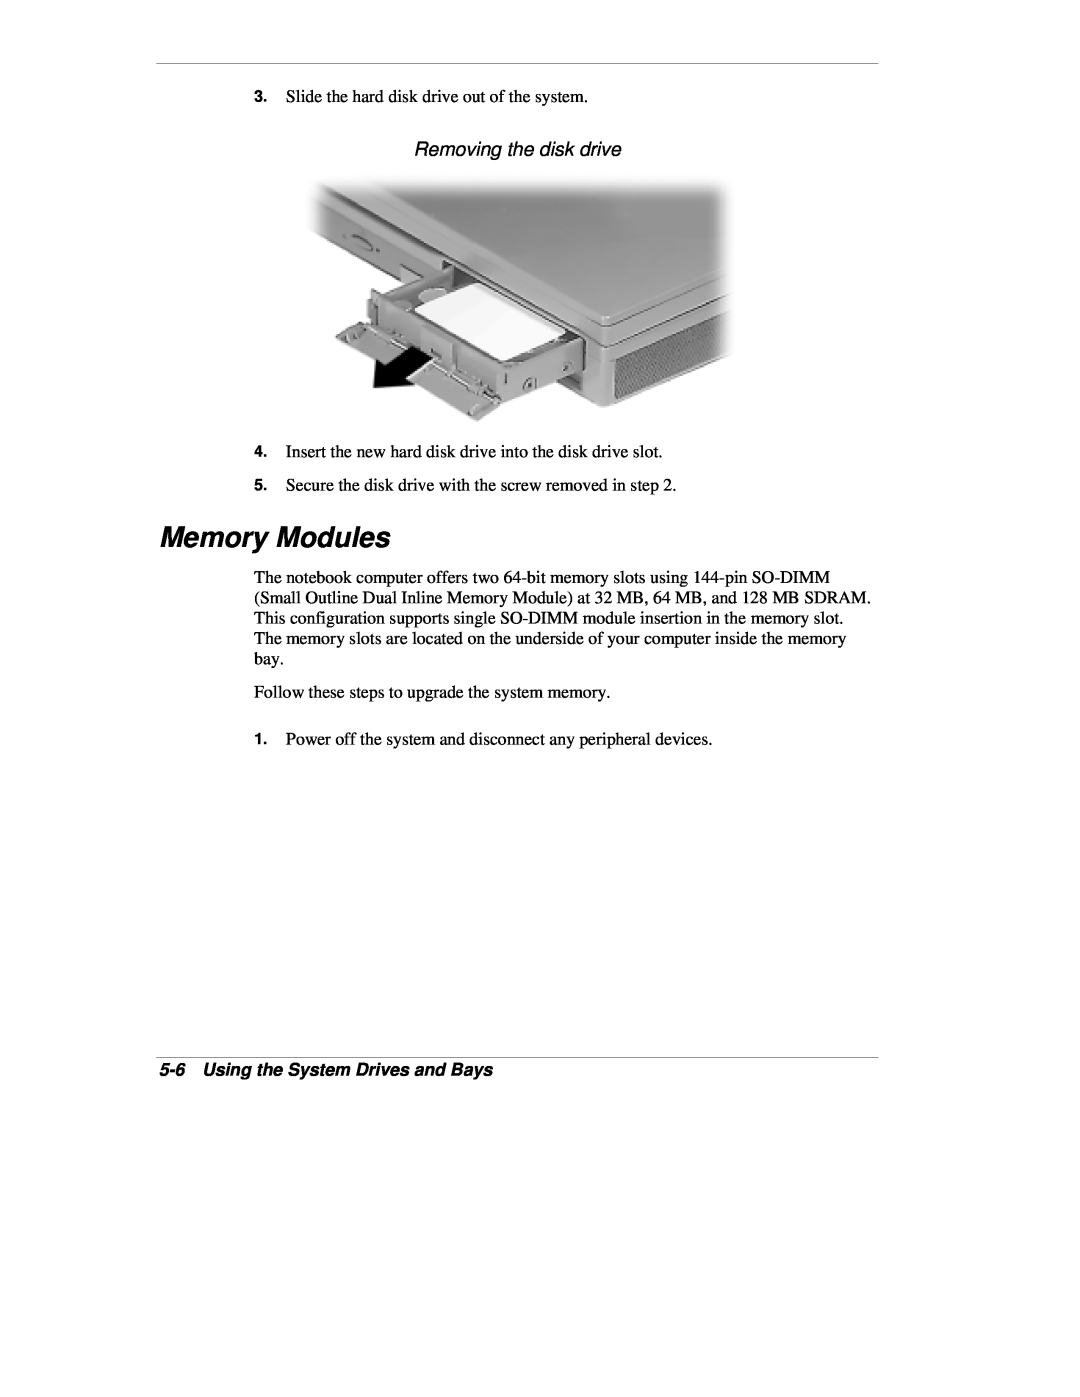 NEC VX manual Memory Modules, Removing the disk drive, Using the System Drives and Bays 